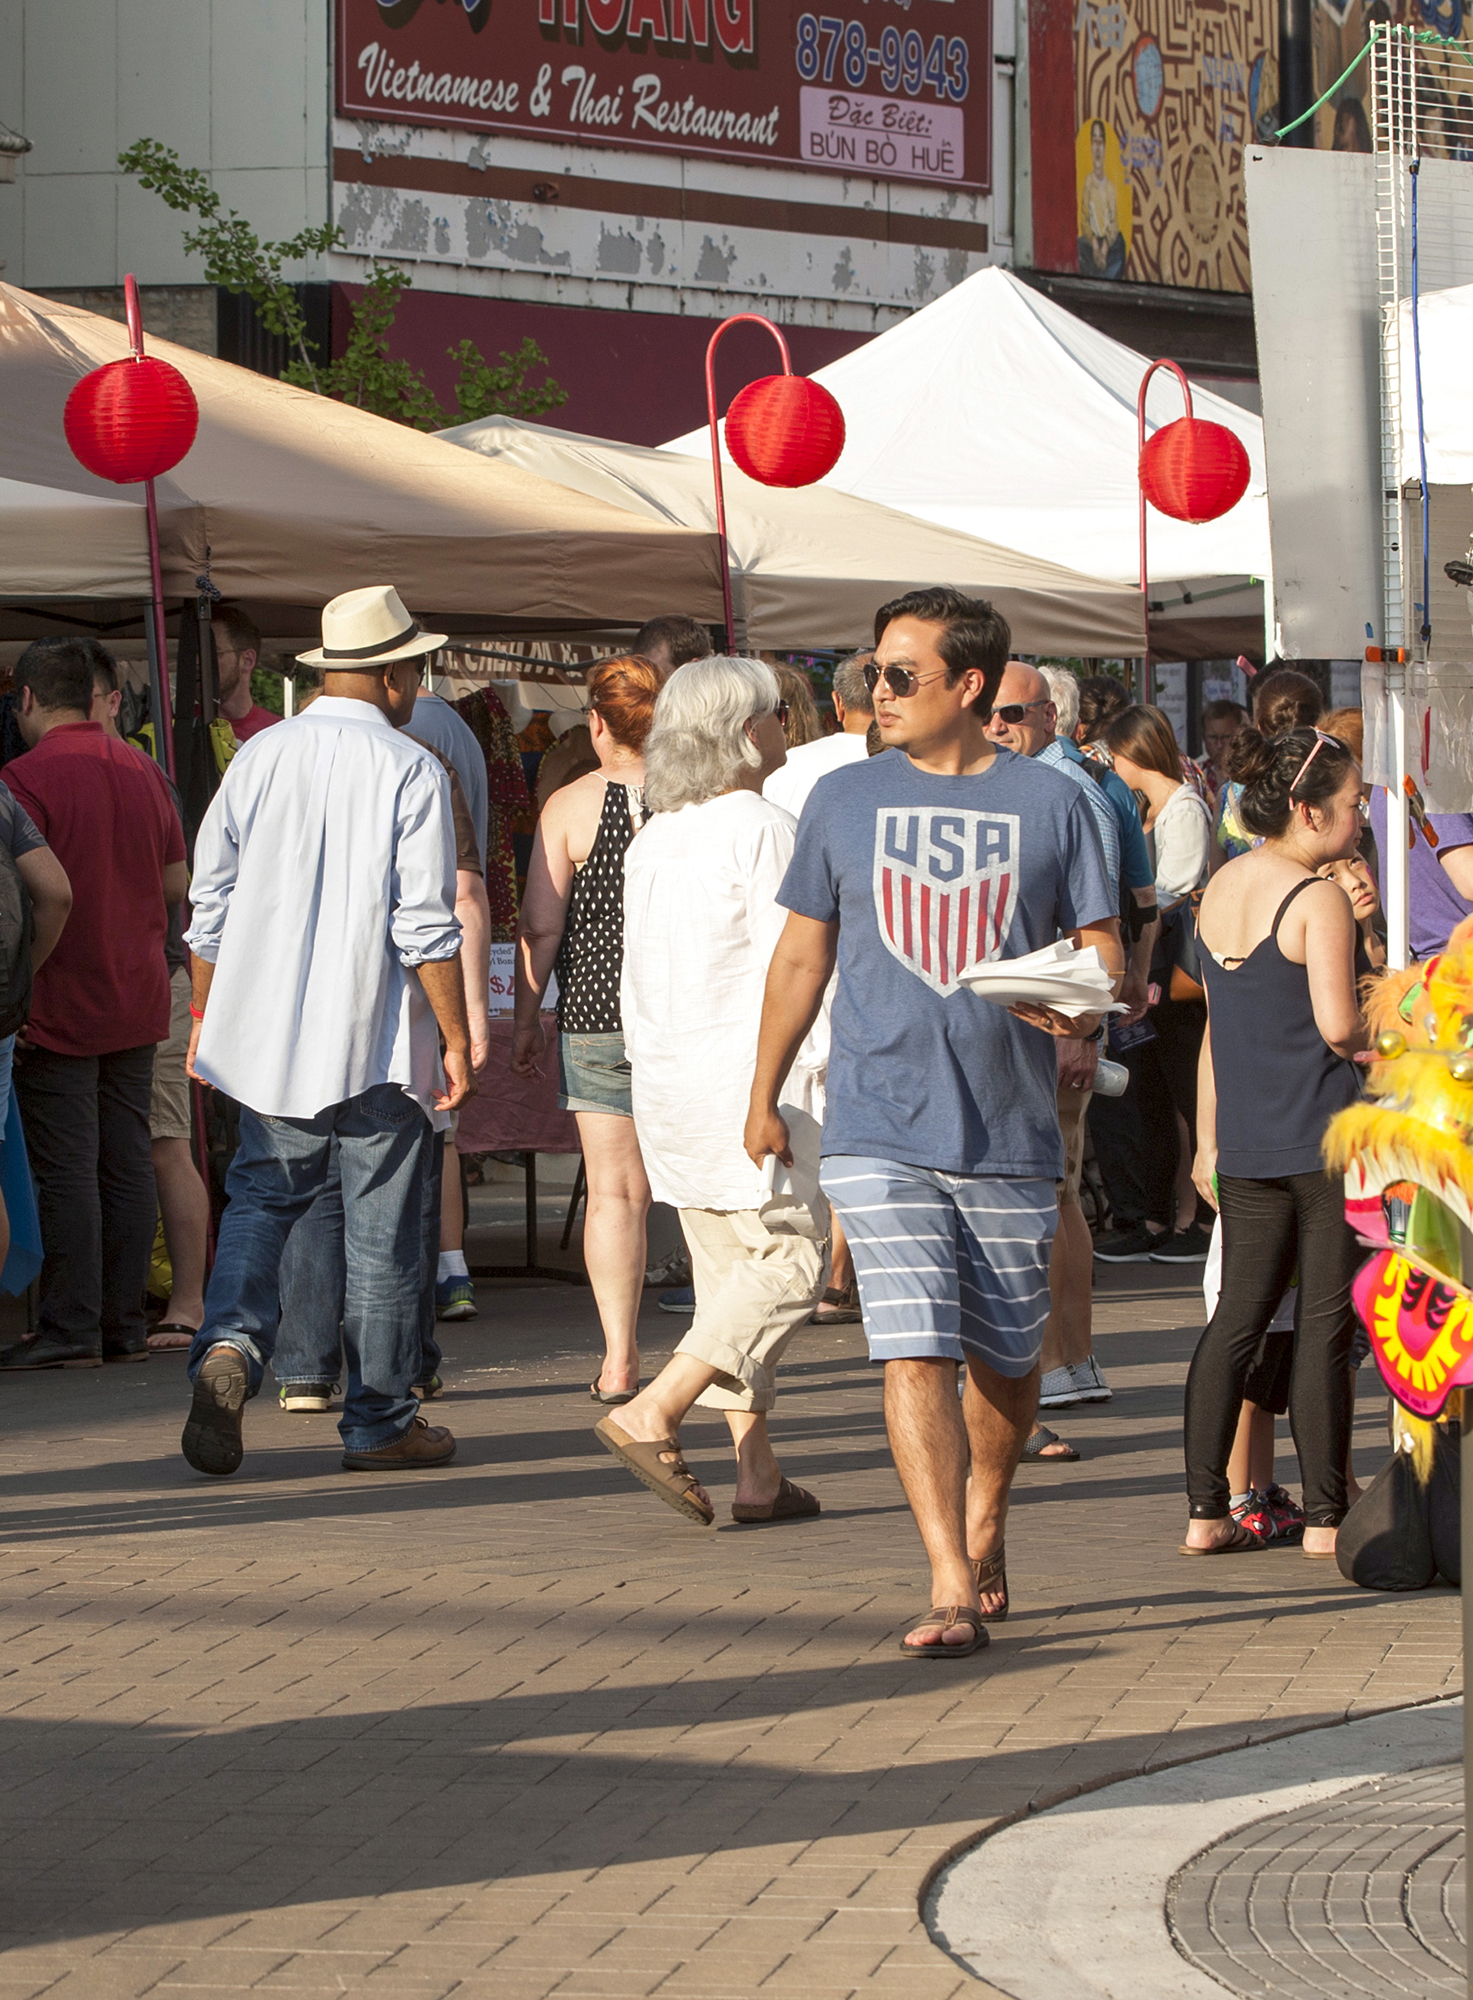 People shop at a busy outdoor market on a streetscape paved with Unilock Eco-Priora permeable pavers.